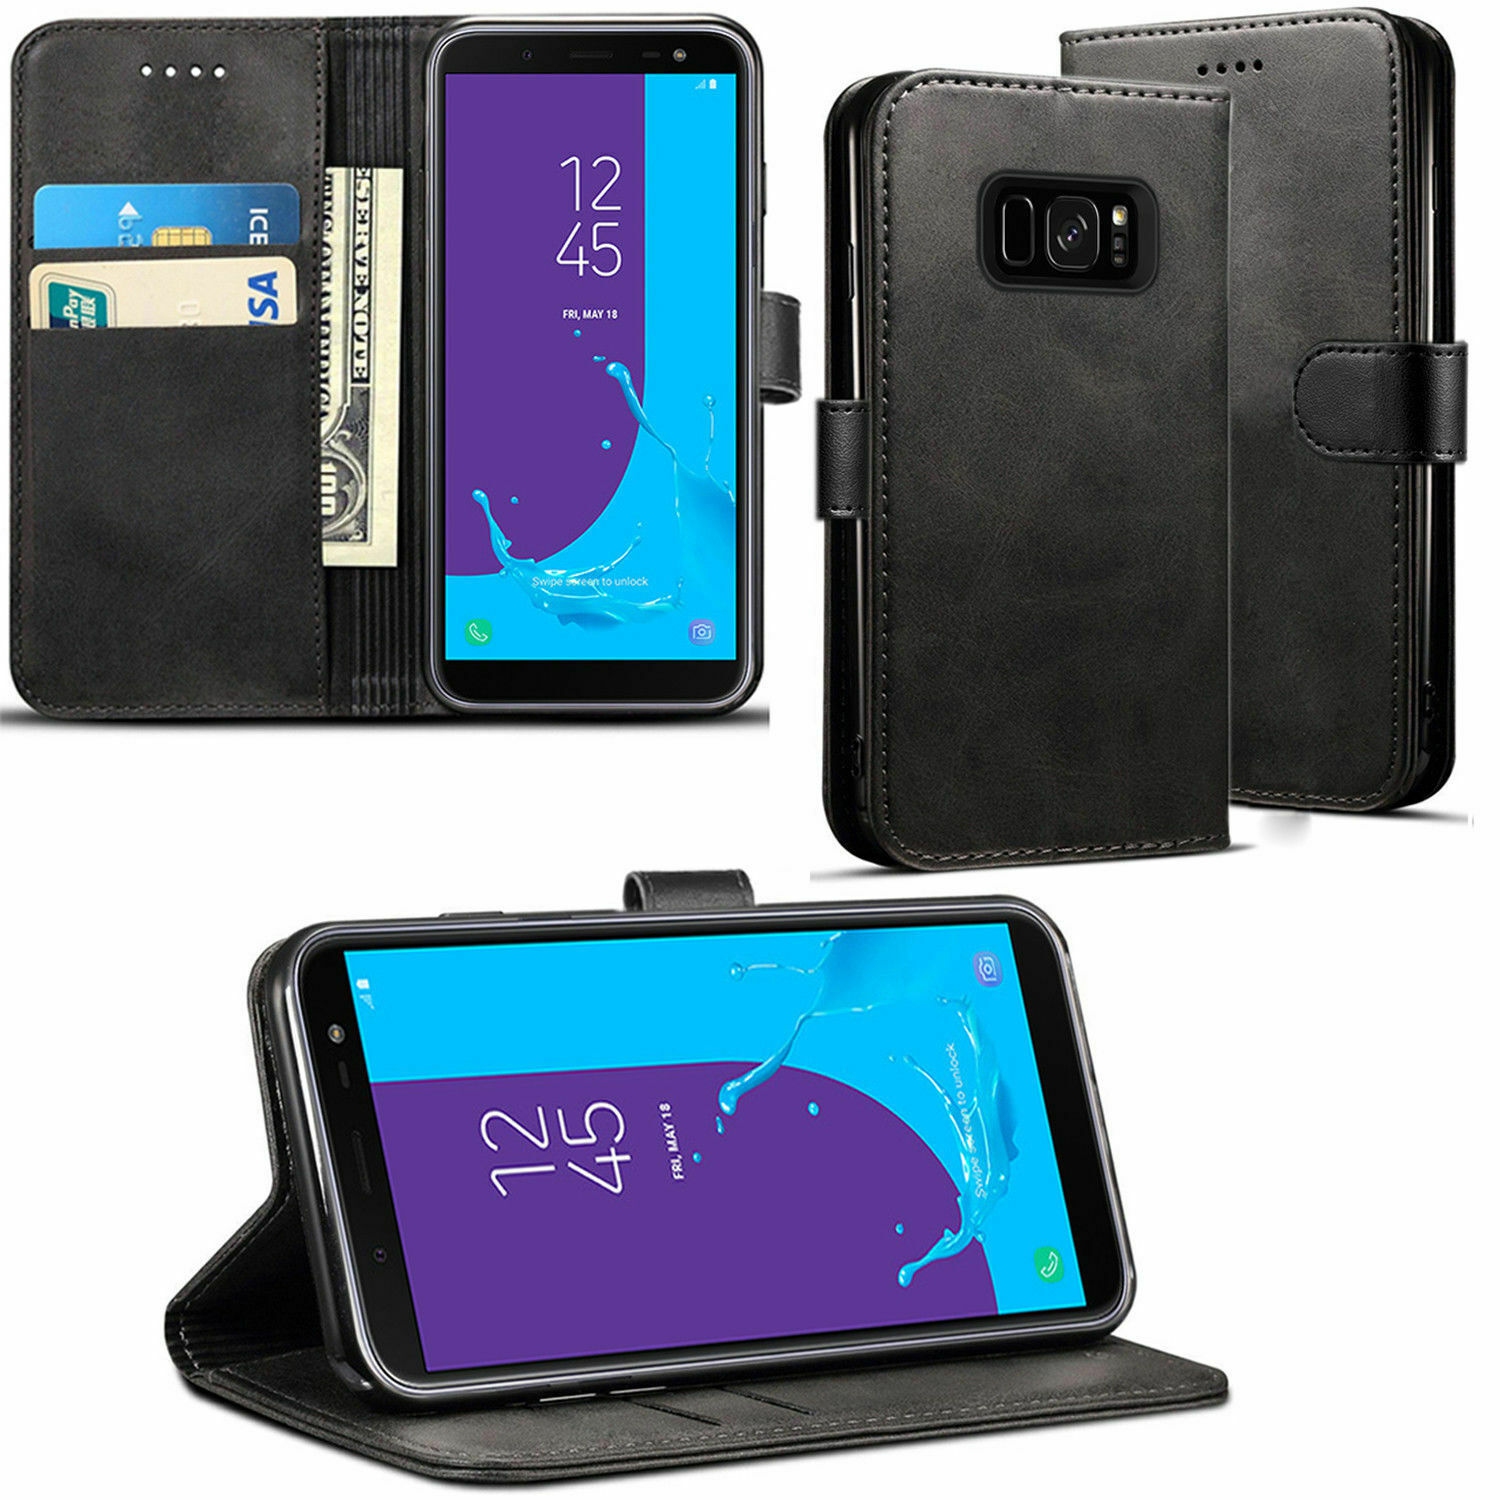 【CSmart】 Magnetic Card Slot Leather Folio Wallet Flip Case Cover for Samsung Galaxy S8, Black